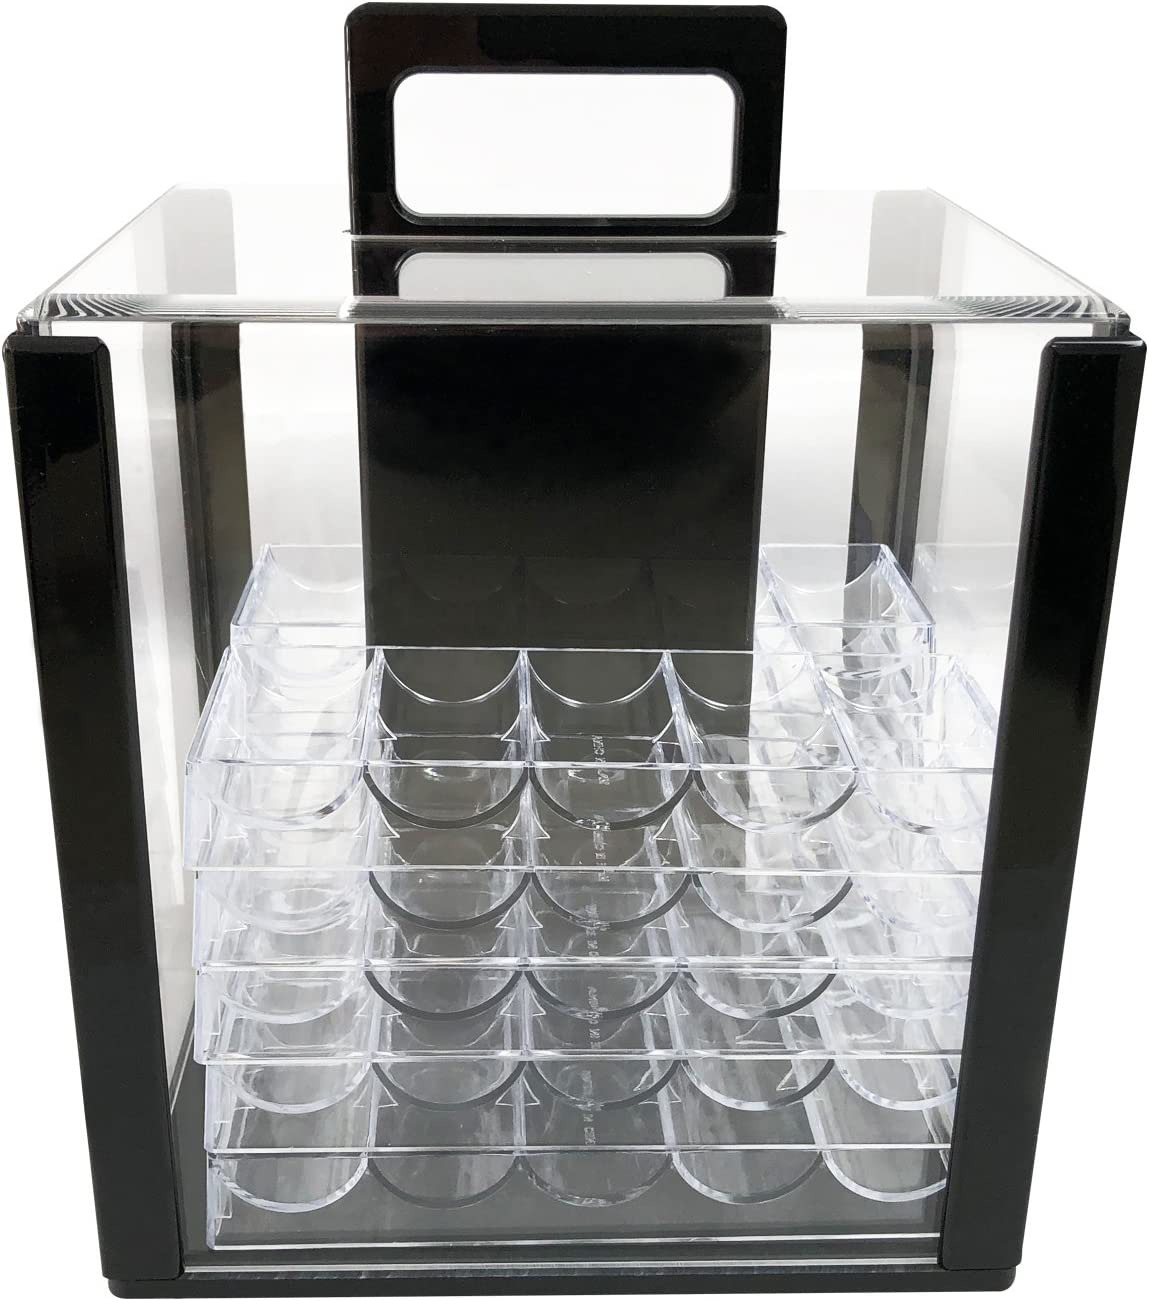 Yuanhe 1000 Chip Clear Acrylic Poker Chip Carrier-Includes 10 Chip Racks